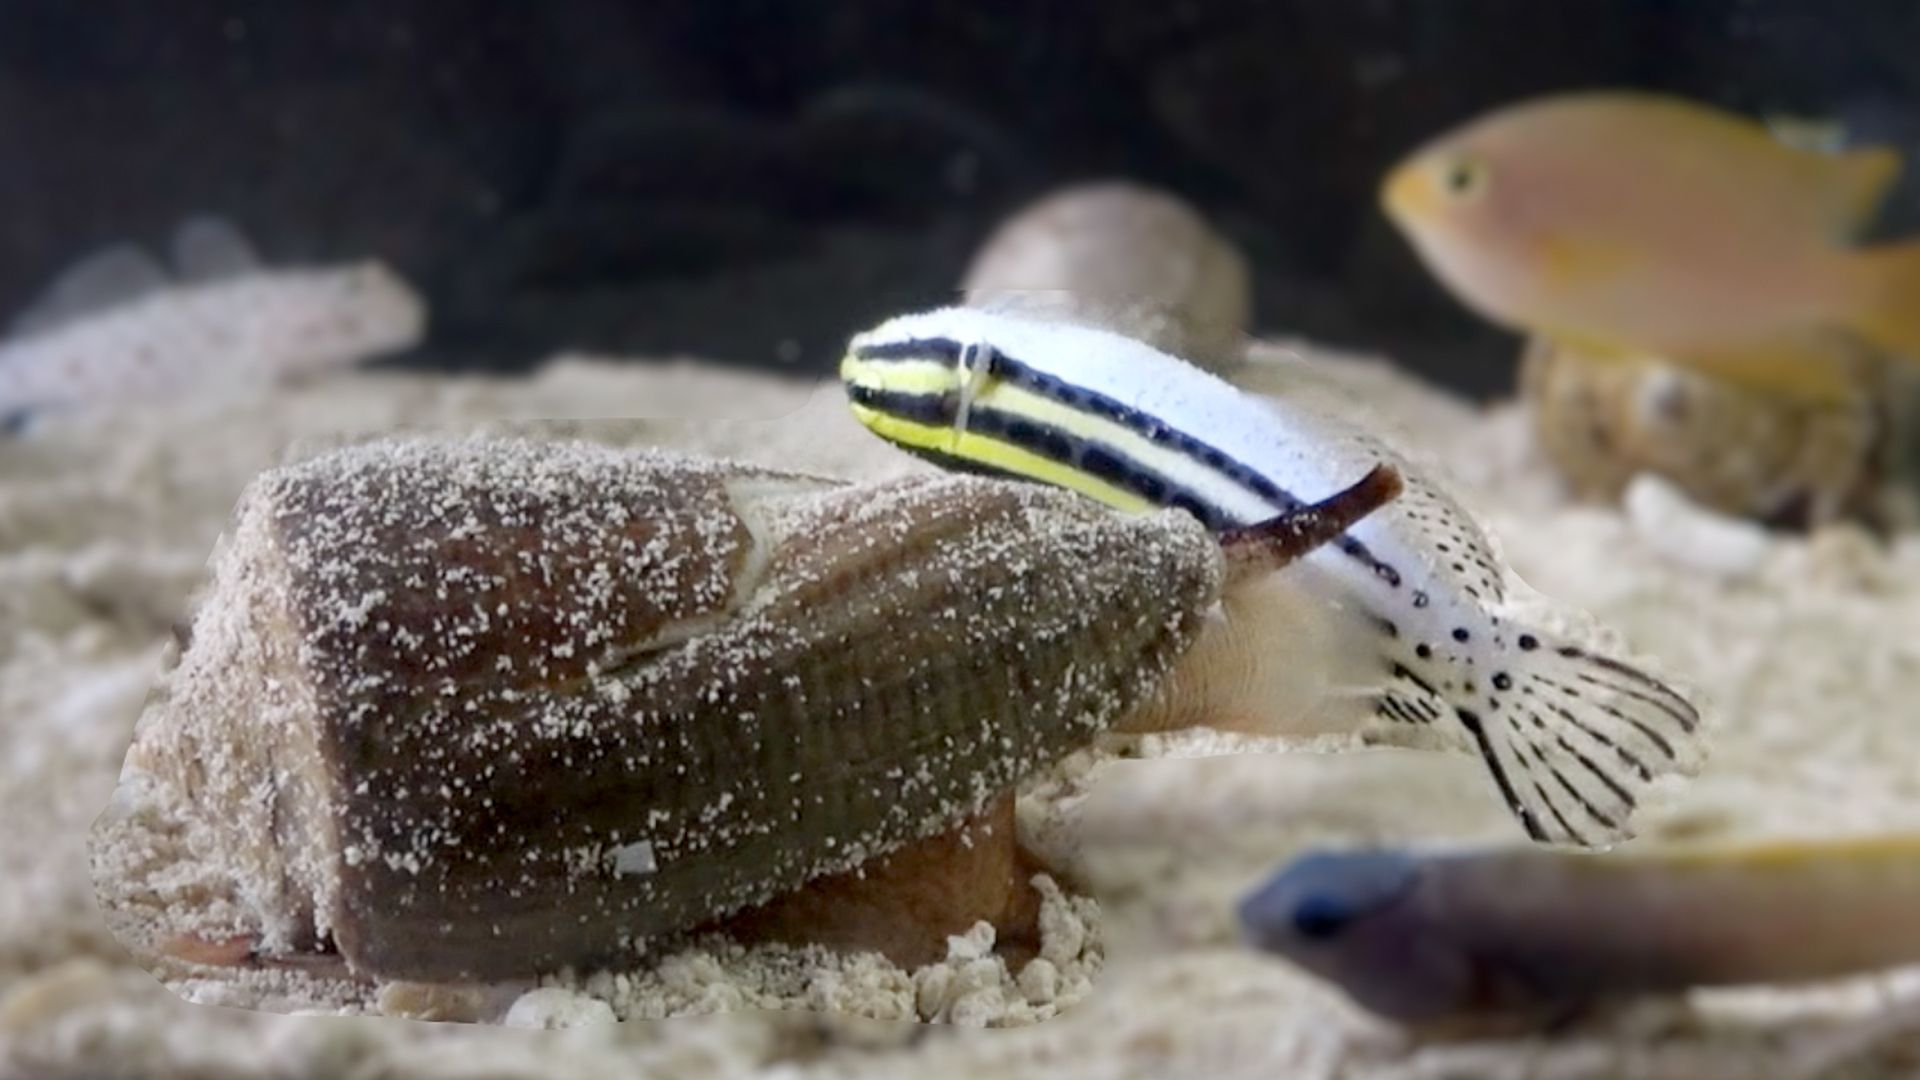 The deep-water cone snail, Conus neocostatus, catching a fish.